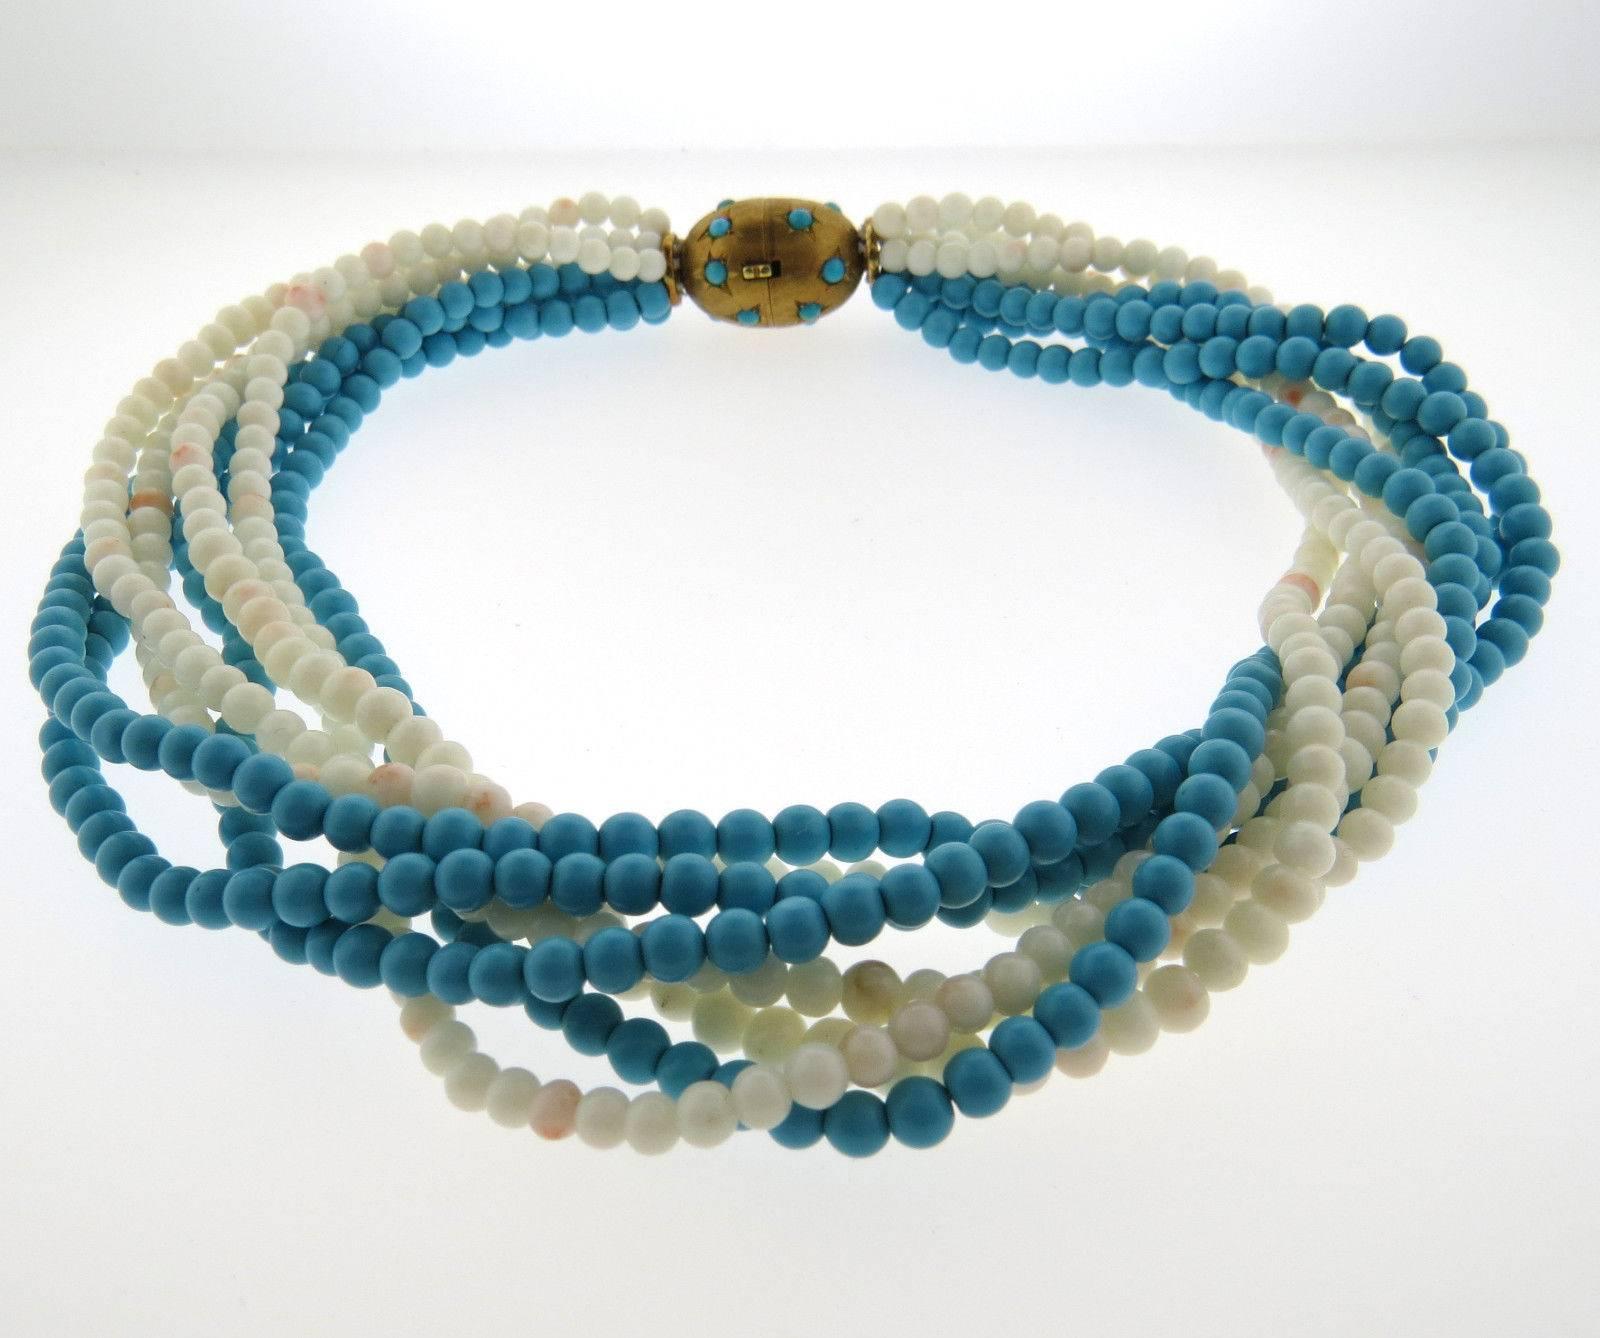 Beautiful 1960s angel skin coral and turquoise beaded multi-strand torsade necklace.  Lovely genuine gemstone turquoise beads measuring 4.8mm - 5.2mm and angel skin coral beads measuring 4.5mm - 5.35mm set with a gorgeous 18k gold (tested) turquoise